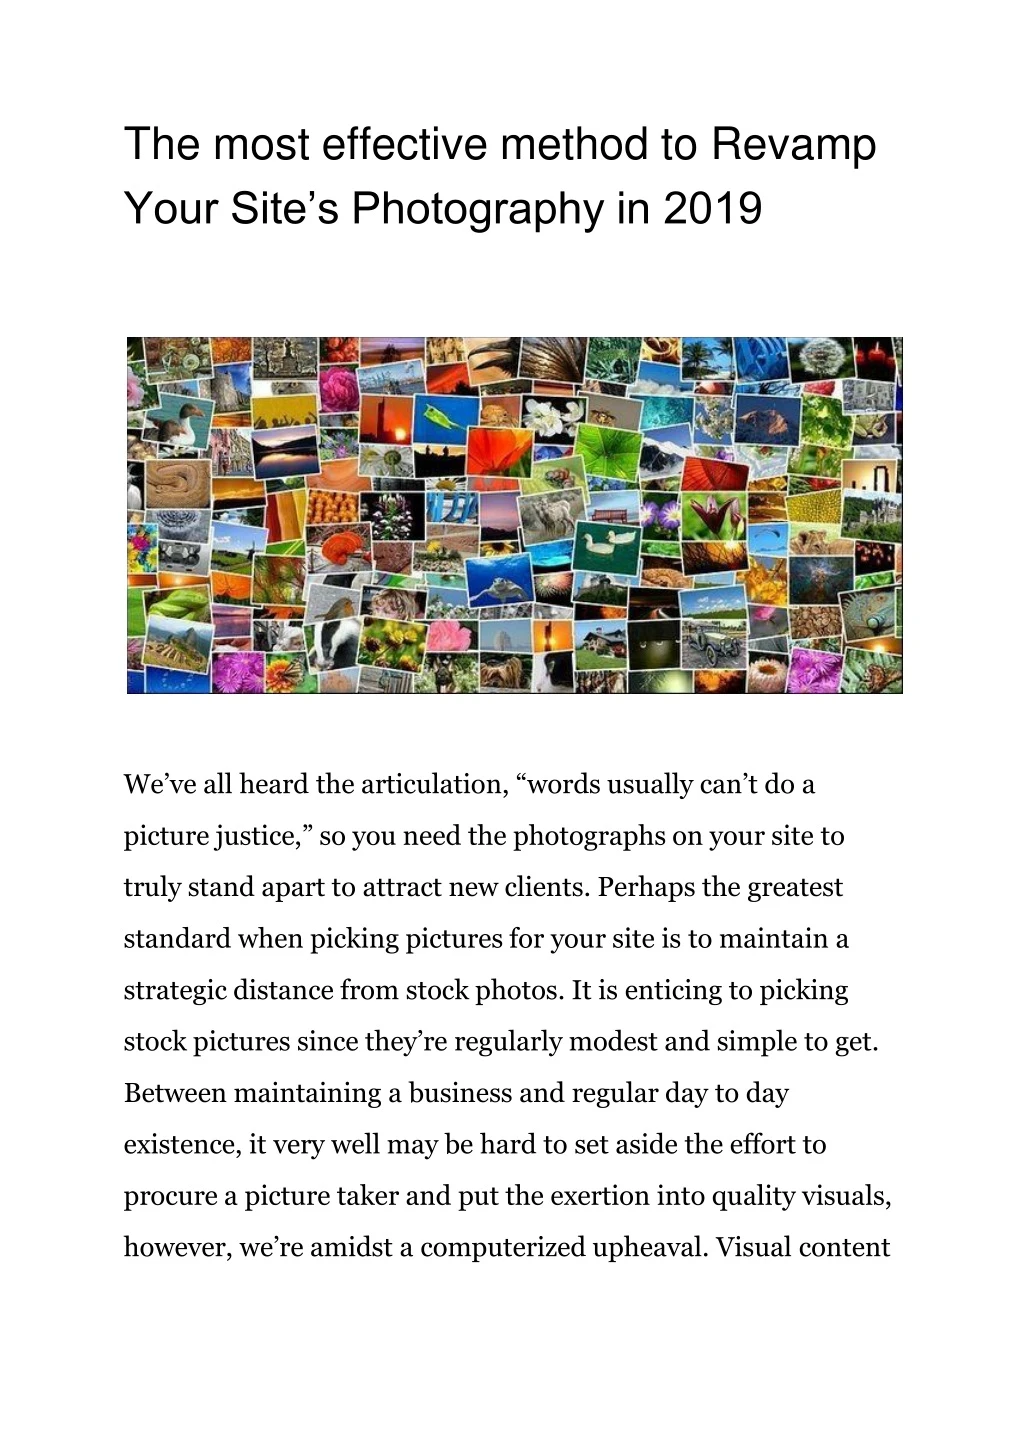 the most effective method to revamp your site s photography in 2019